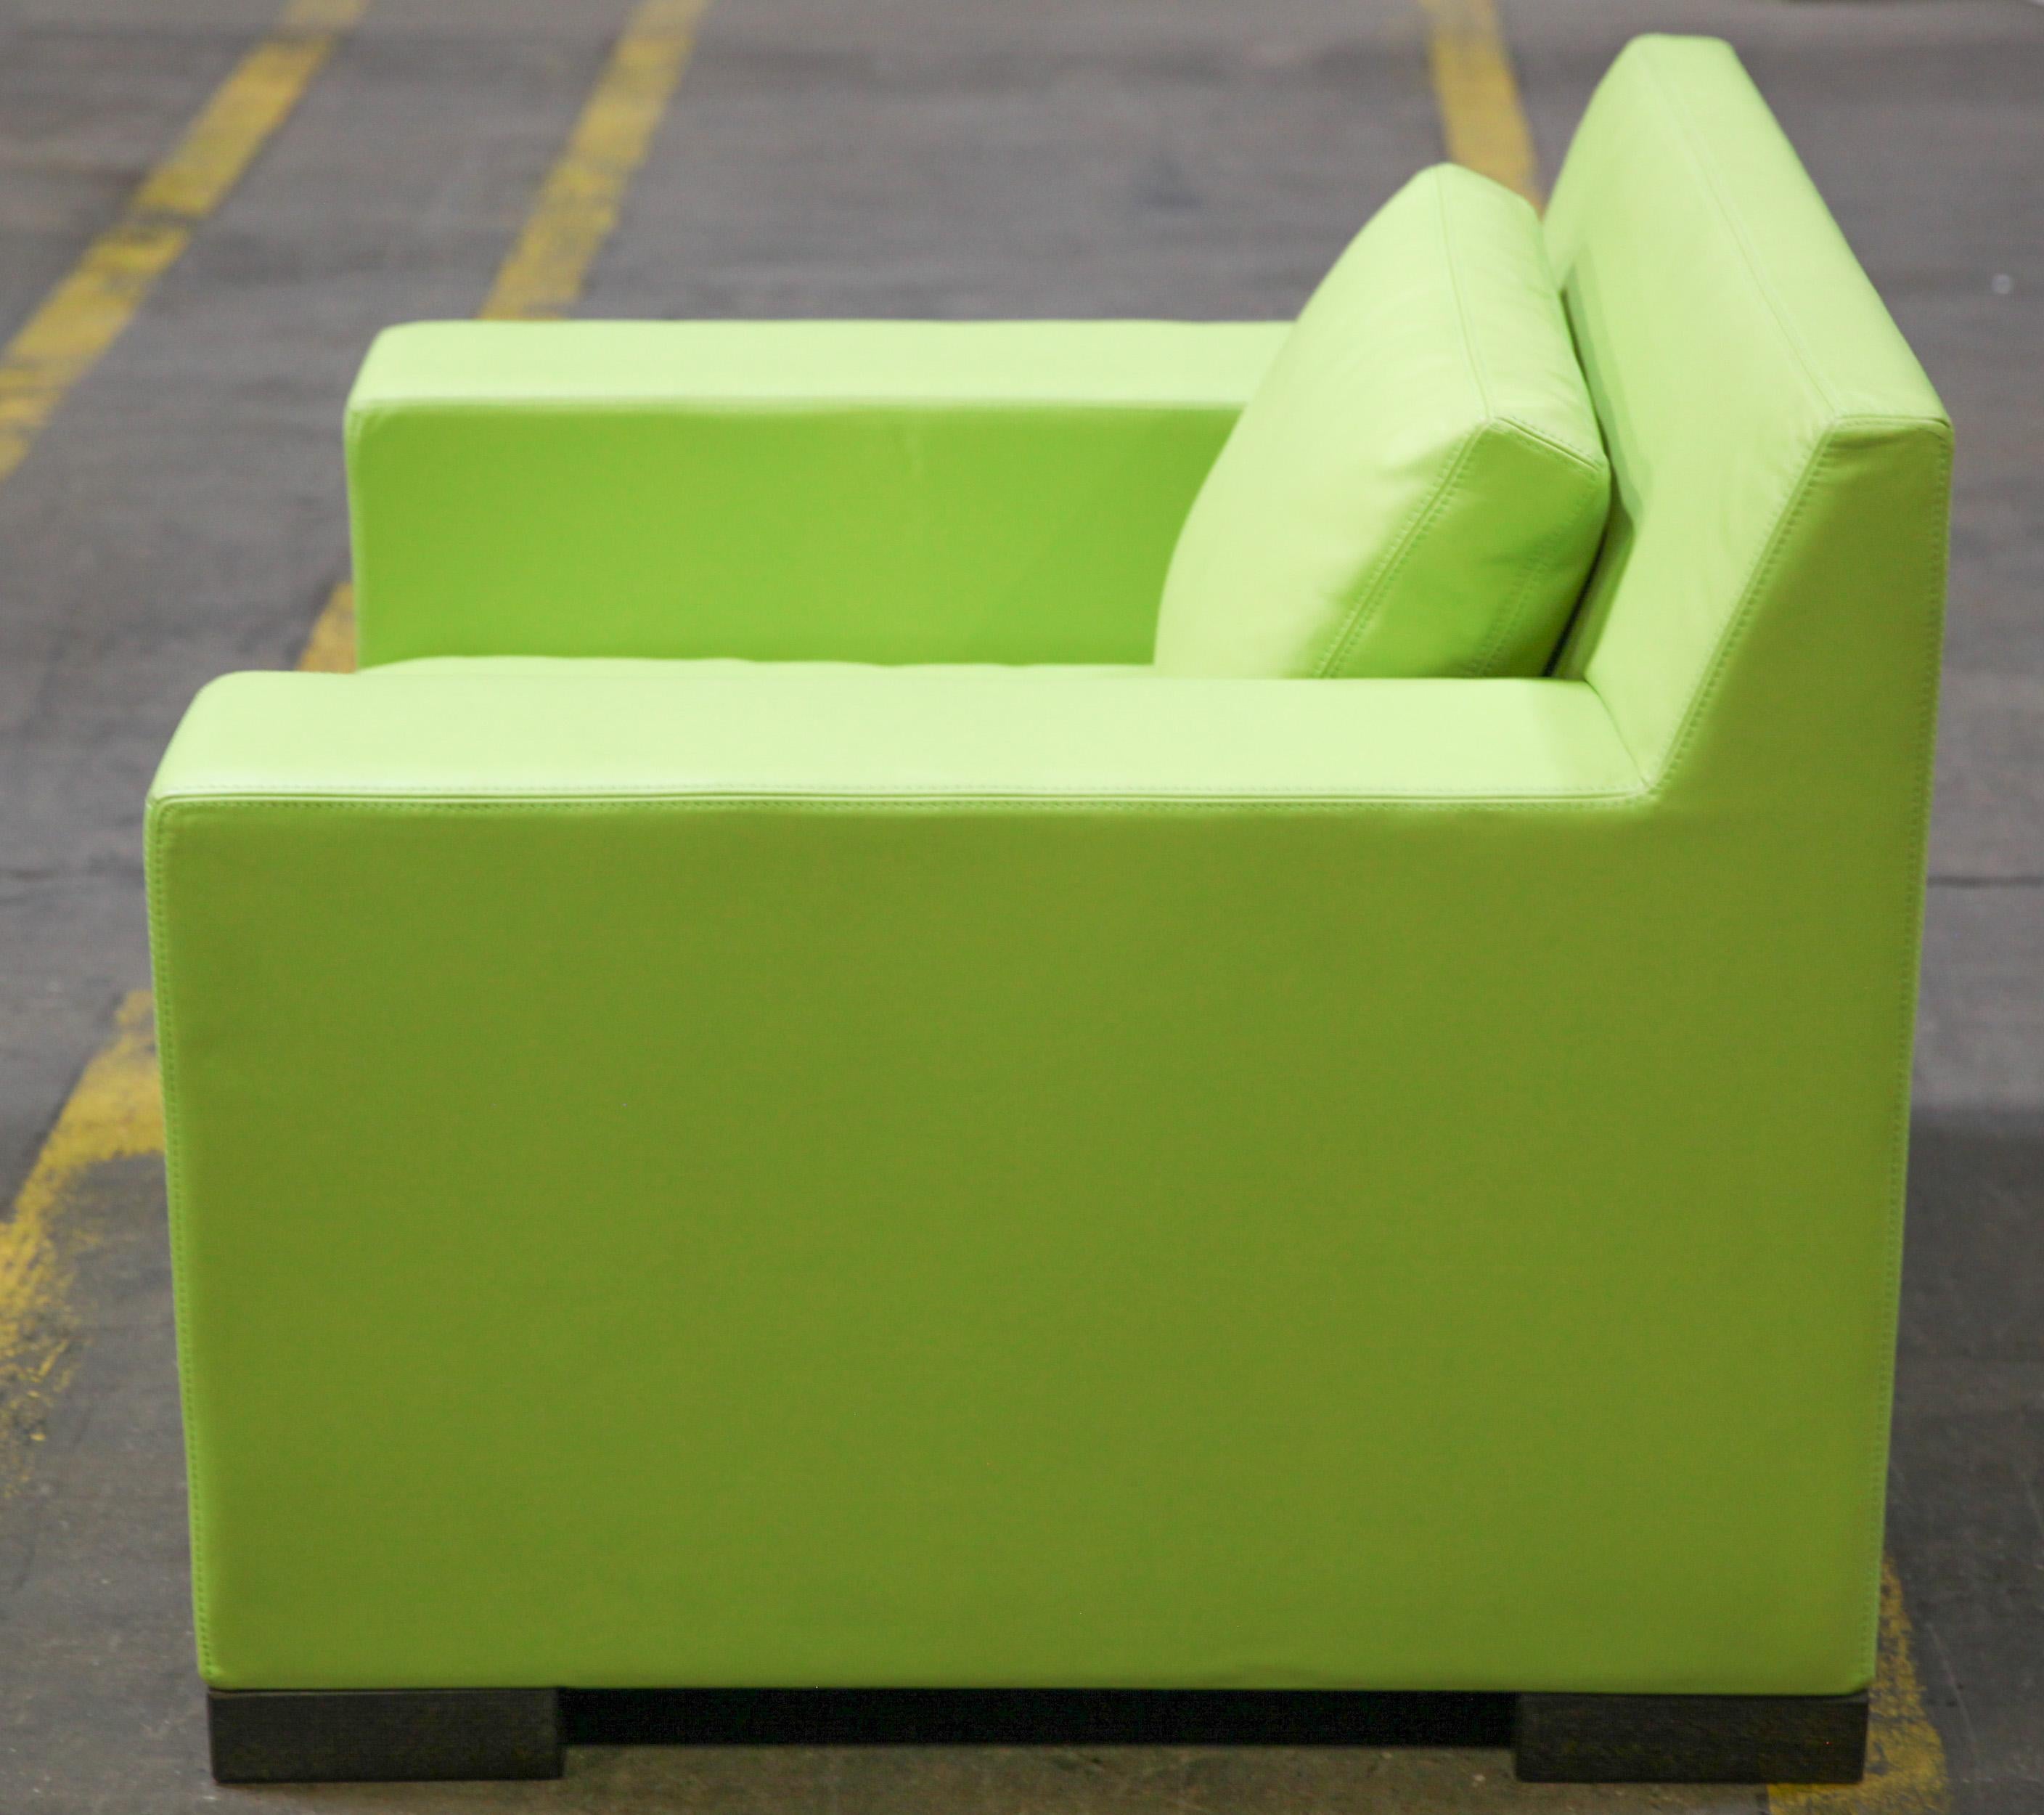 Modern club chair in green leather upholstery and cushion, made by Ideo. The piece has a makers label underneath the seat cushion and is in great vintage condition with age-appropriate wear.